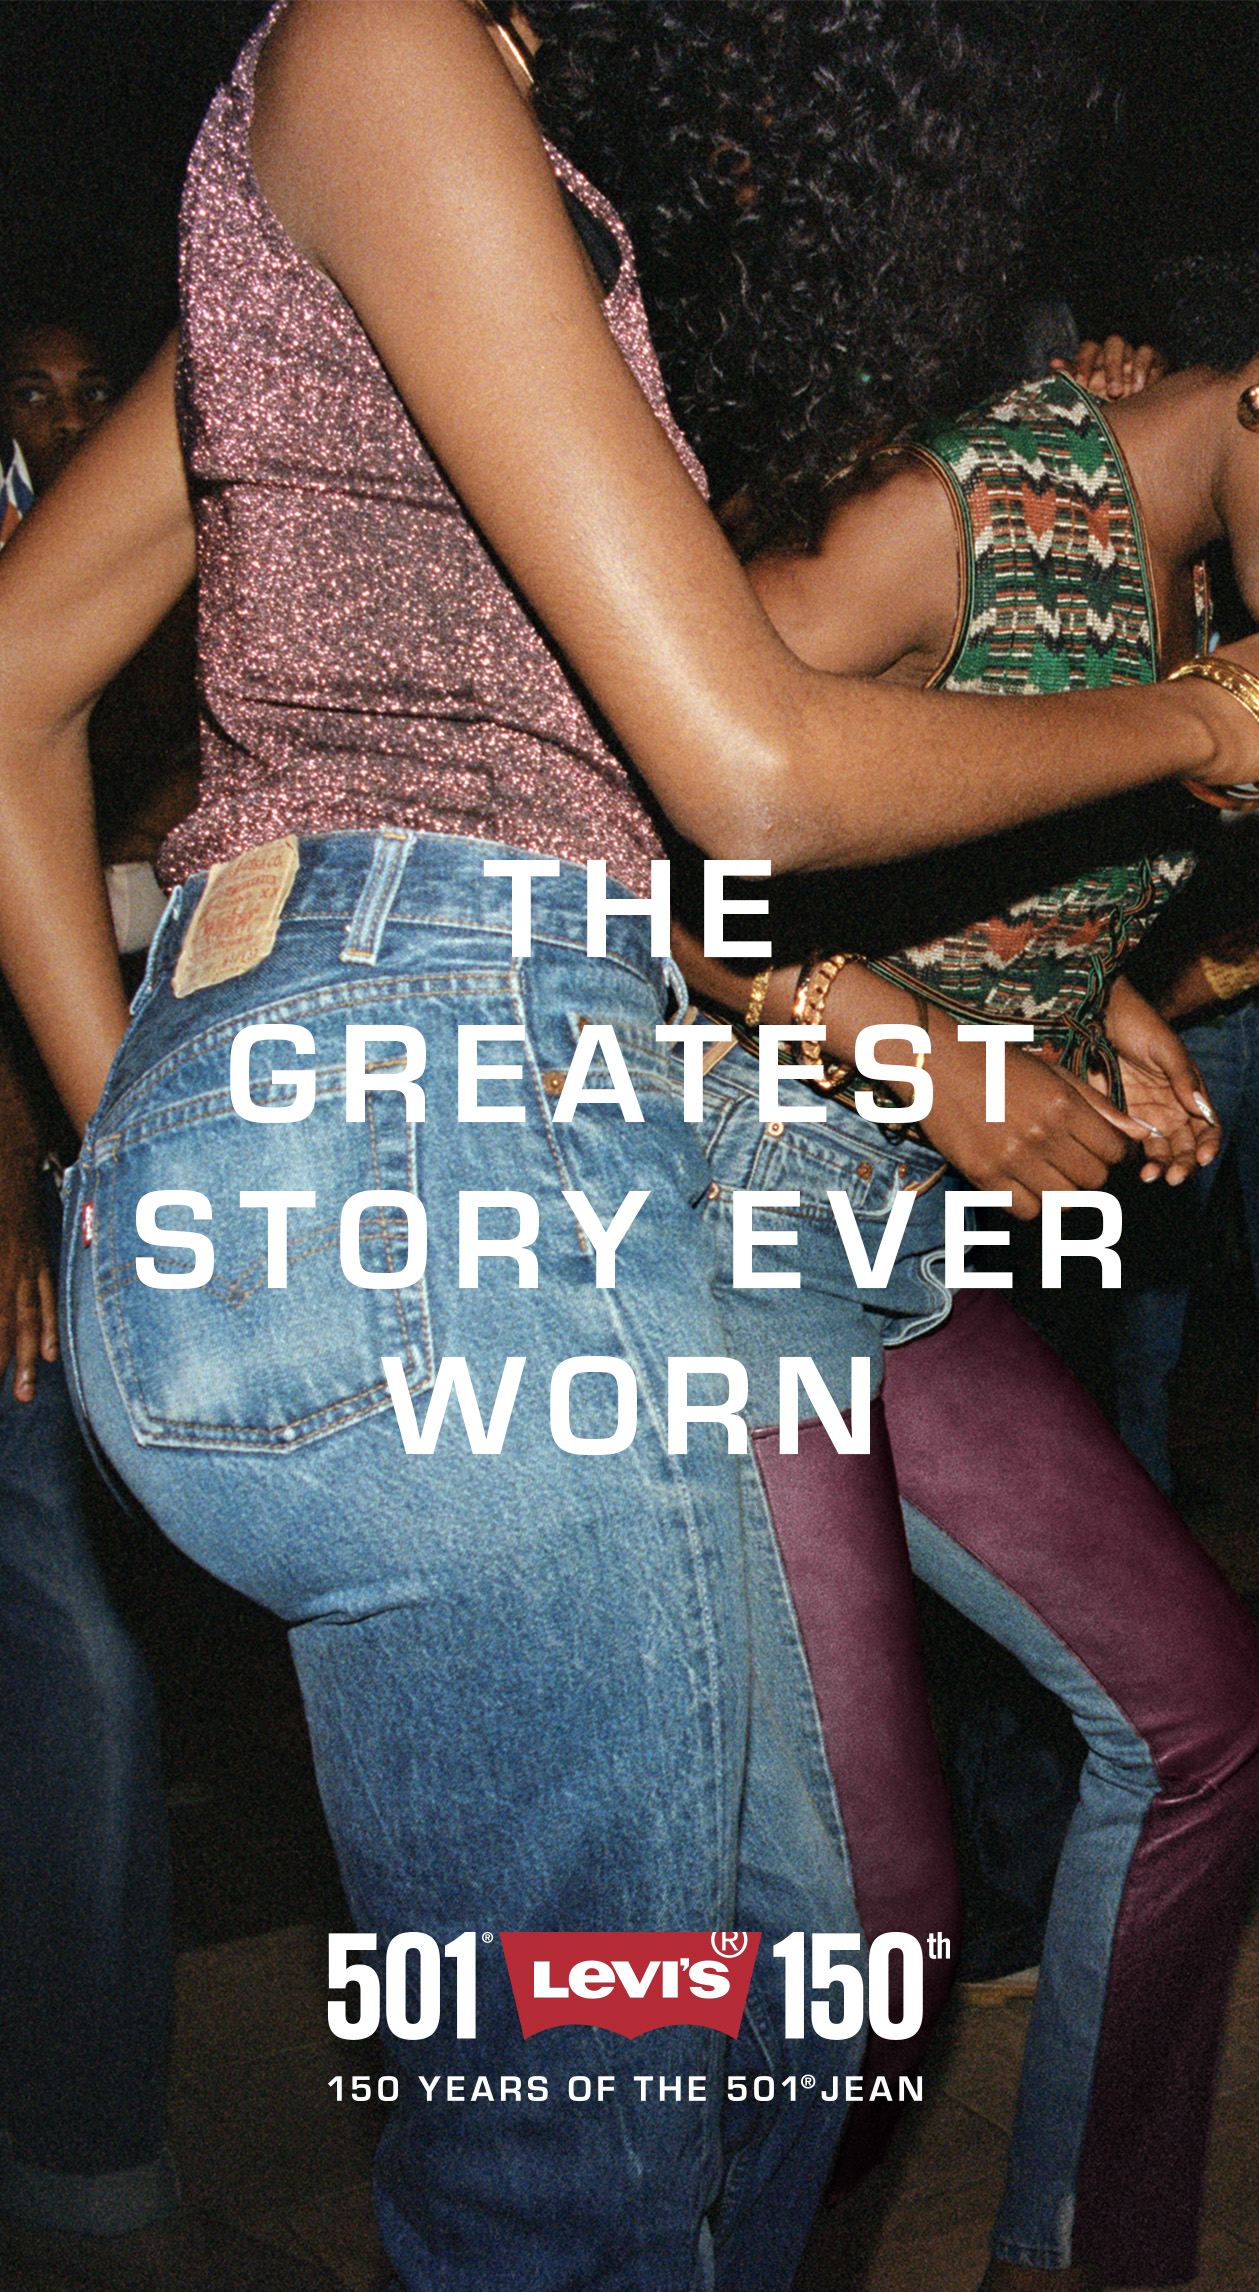 Levi's® Greatest Story Ever Worn, the 150th Anniversary of the Original 501® Jeans